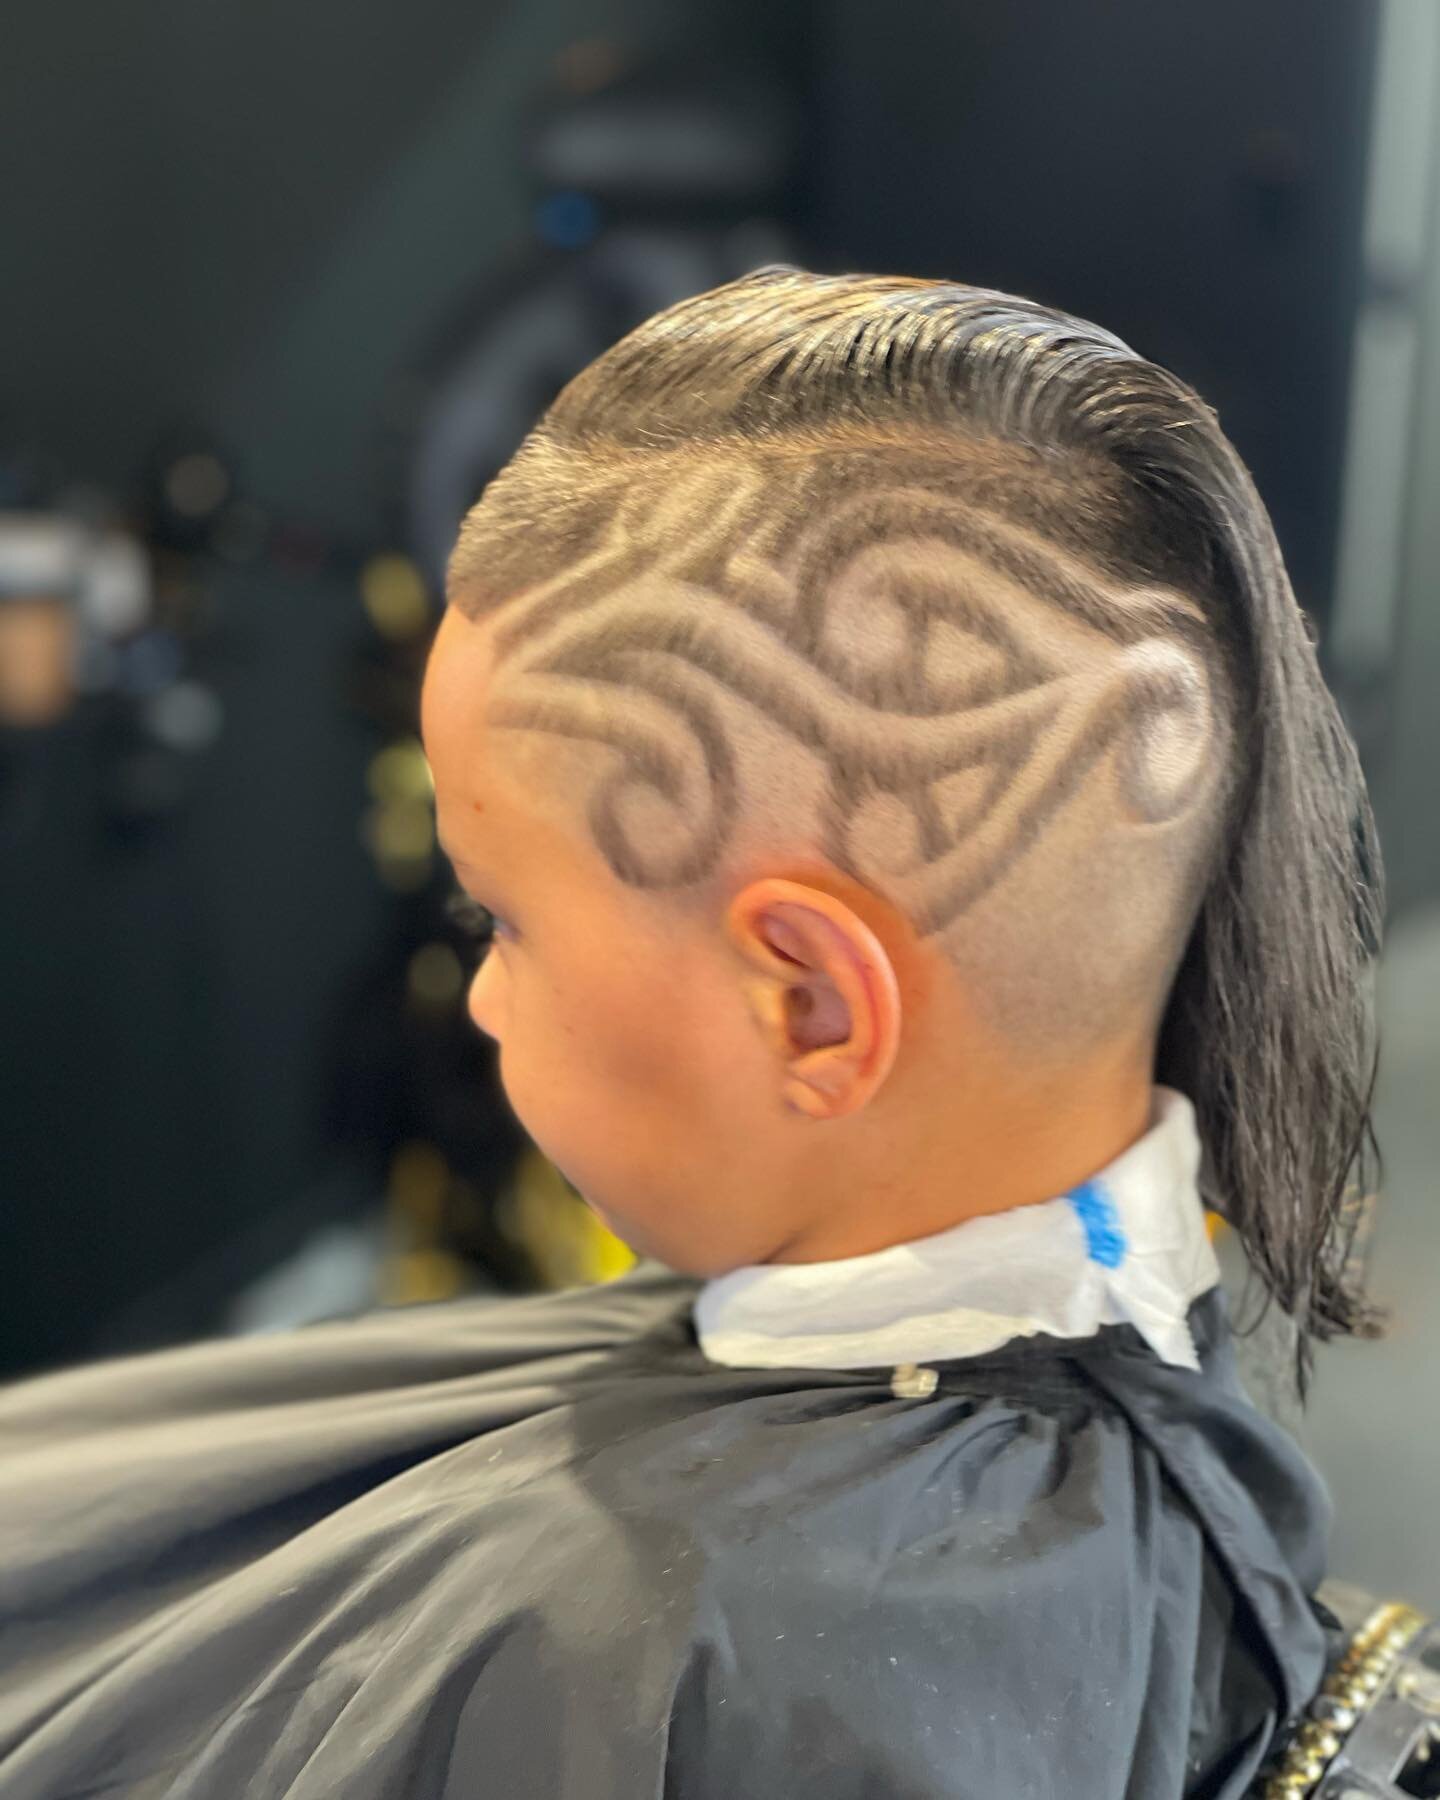 He comes all the way from the Bay of Islands to his favourite barbershop Dr Scissors for this Maori design. 💈💫🤩

We located at 

18 Bakehouse lane, Orewa 

Opposite dear coasties and subway 

Visit our website 
www.drscissors.co.nz

Open 7 days a 